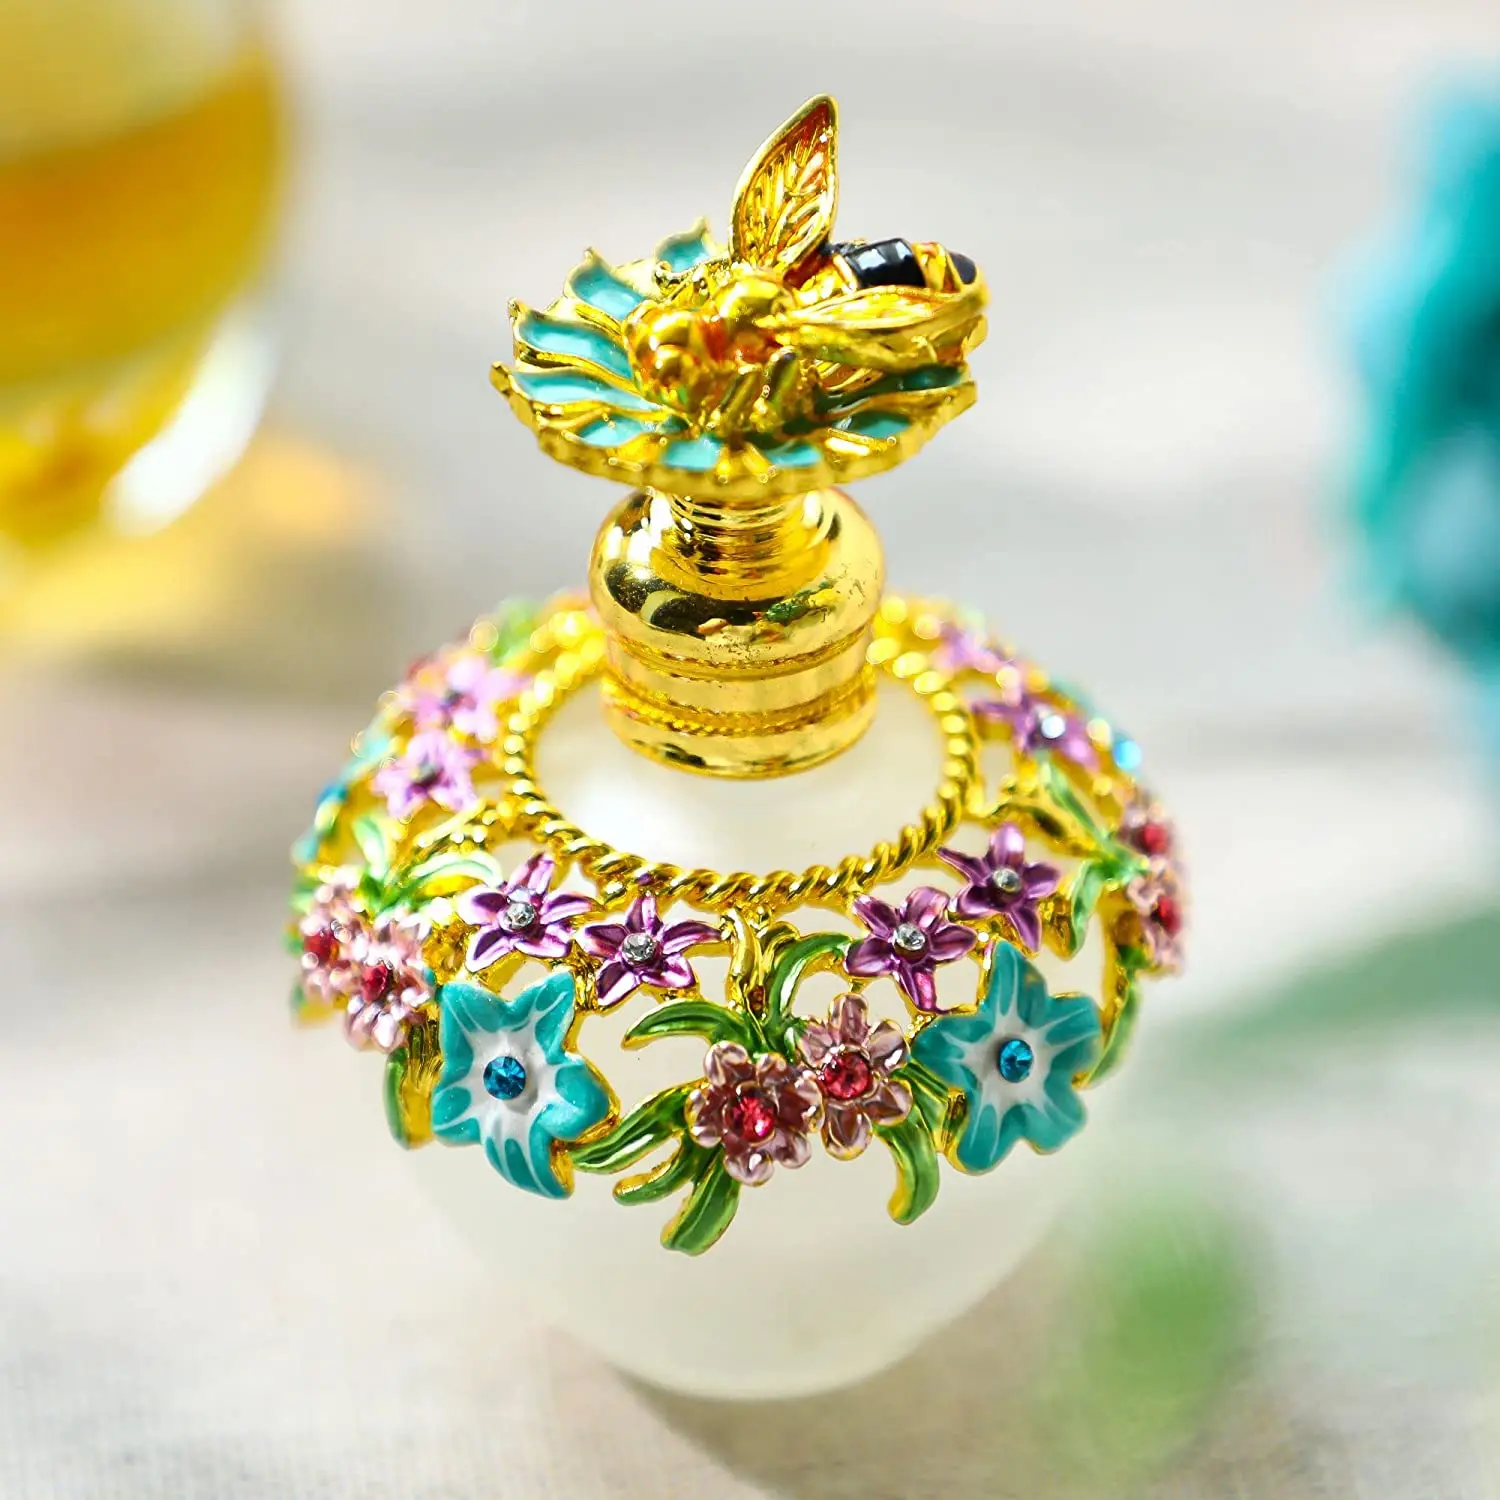 H&D Fancy Glass Perfume Bottle Empty with Flowers Bee Charm Decorative Vintage Crystal Perfume Decanter(Golden,40ML) animal charm warm hat with earflap for boys and girls cartoon kids beanie dropshipping